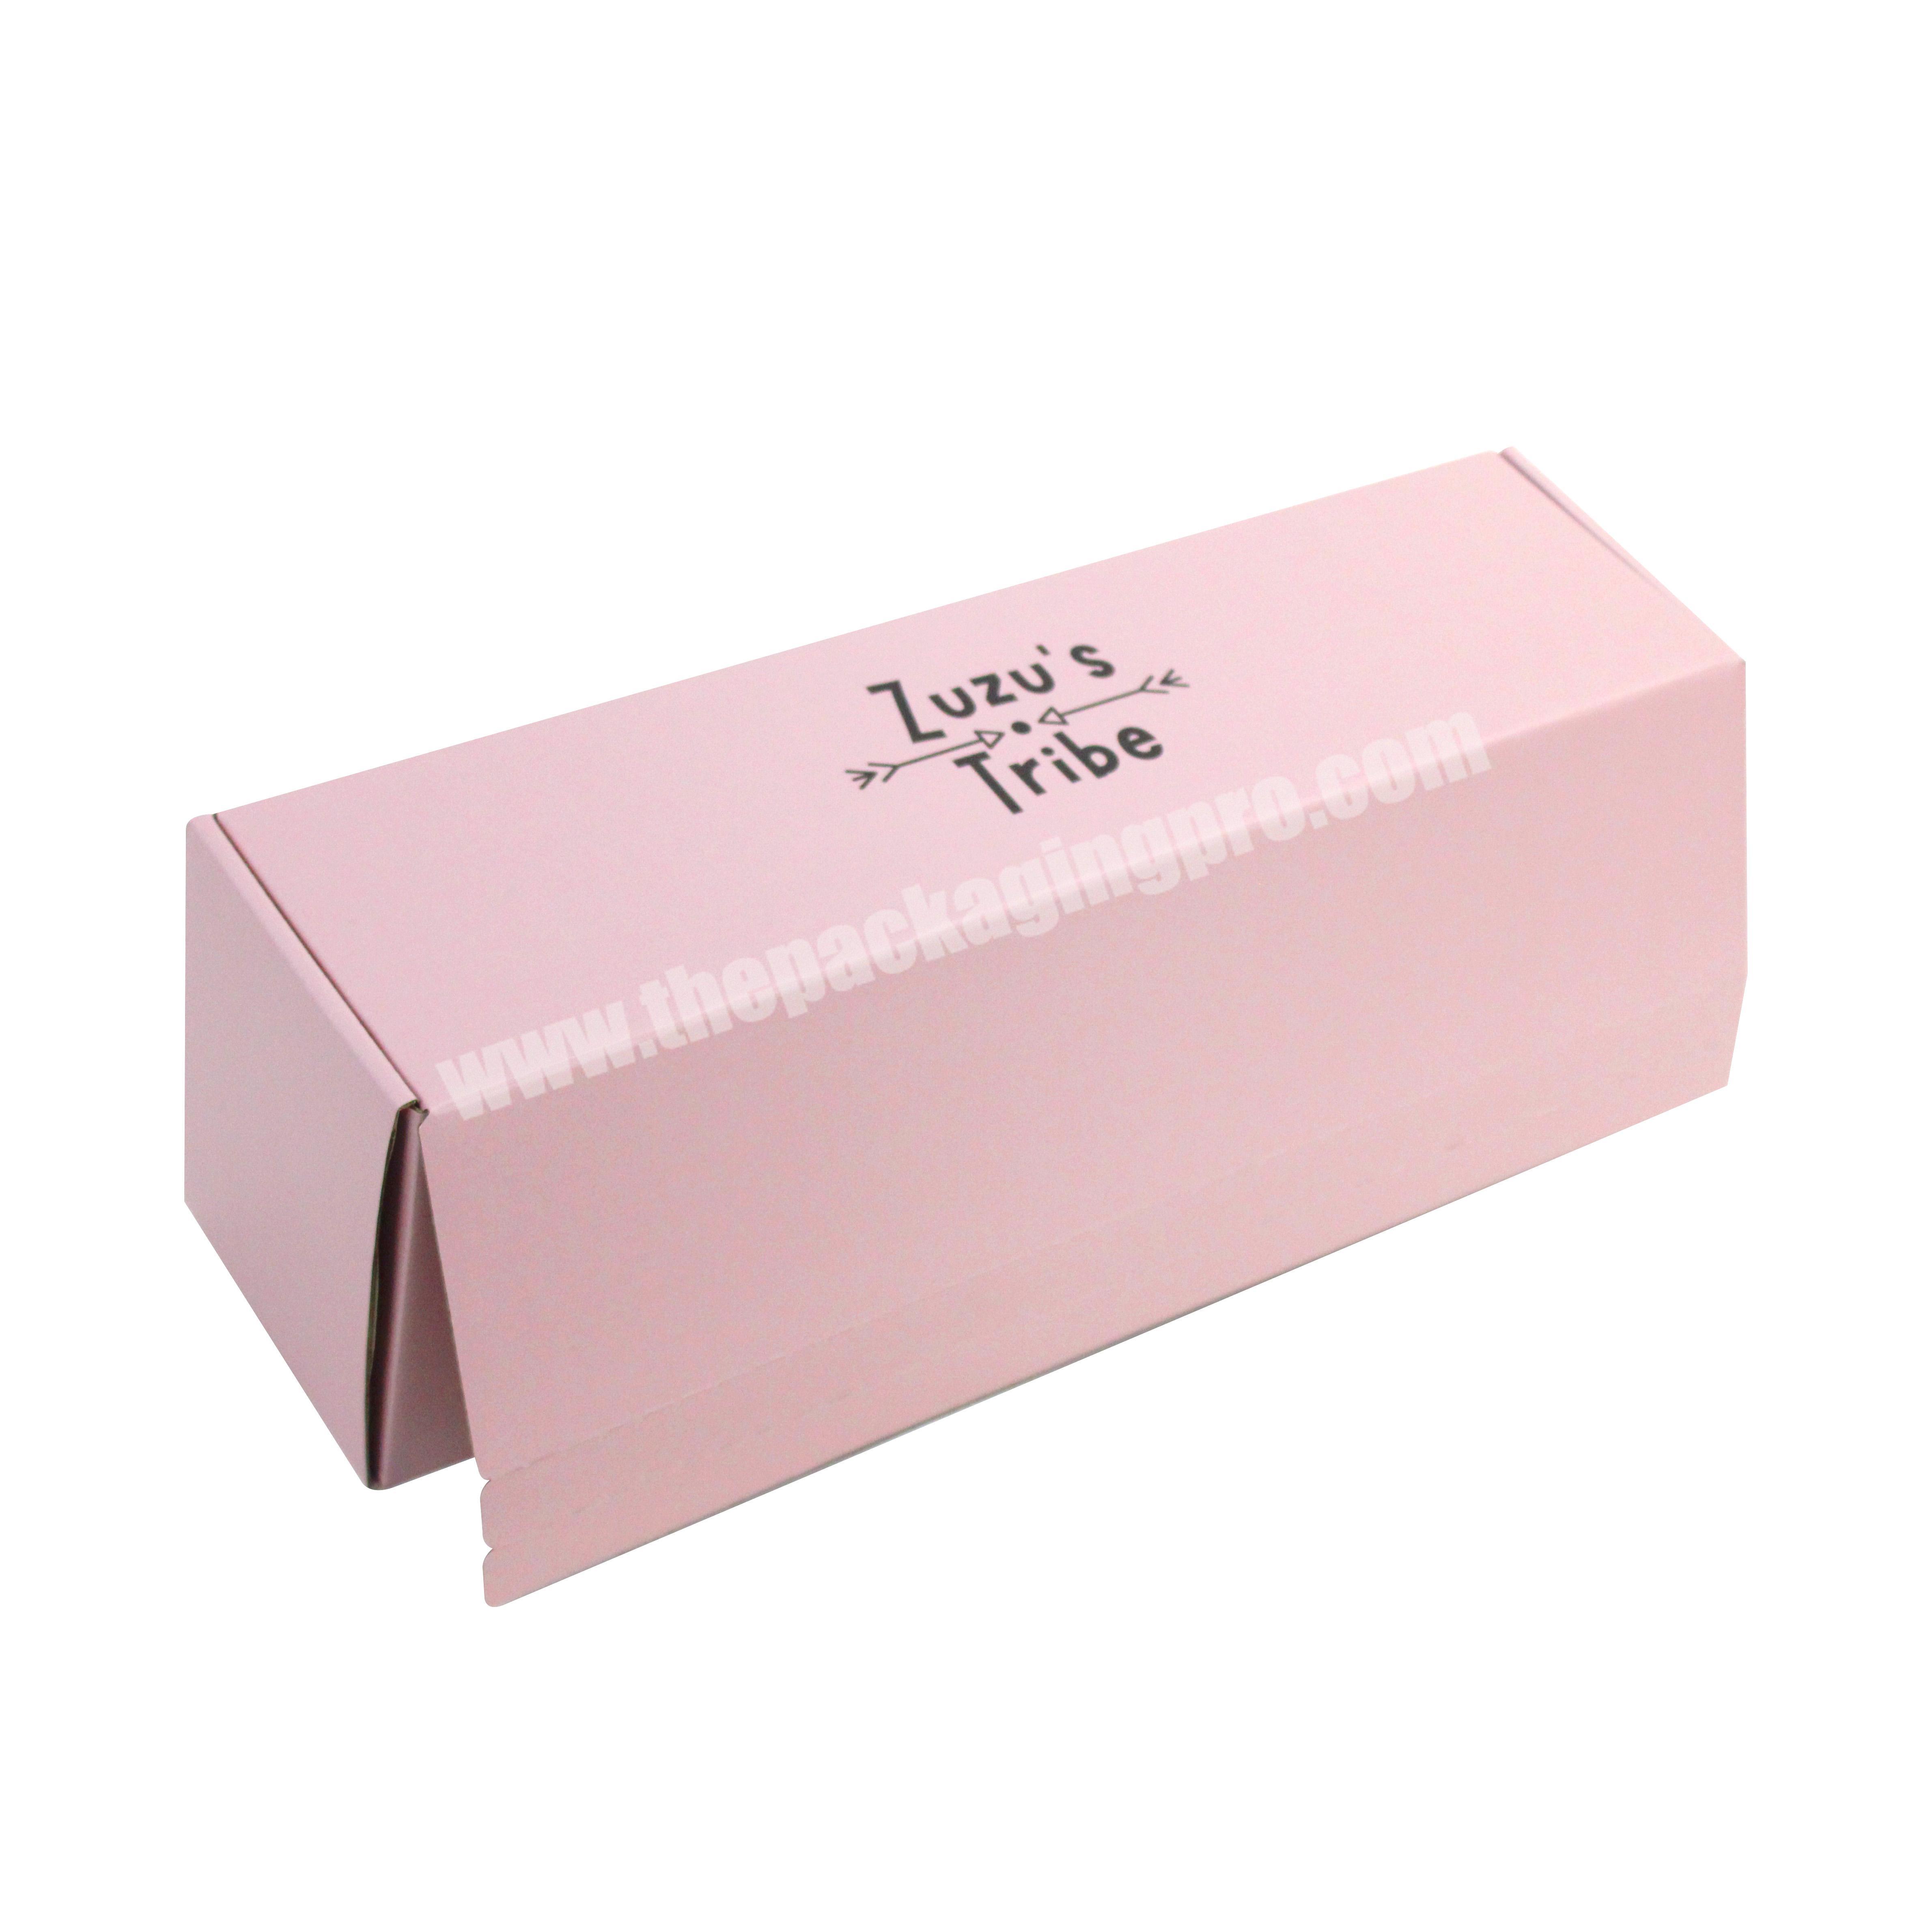 Colorful Custom Printed Corrugated Shipping Boxes Self-Closure With Adhesive Tape